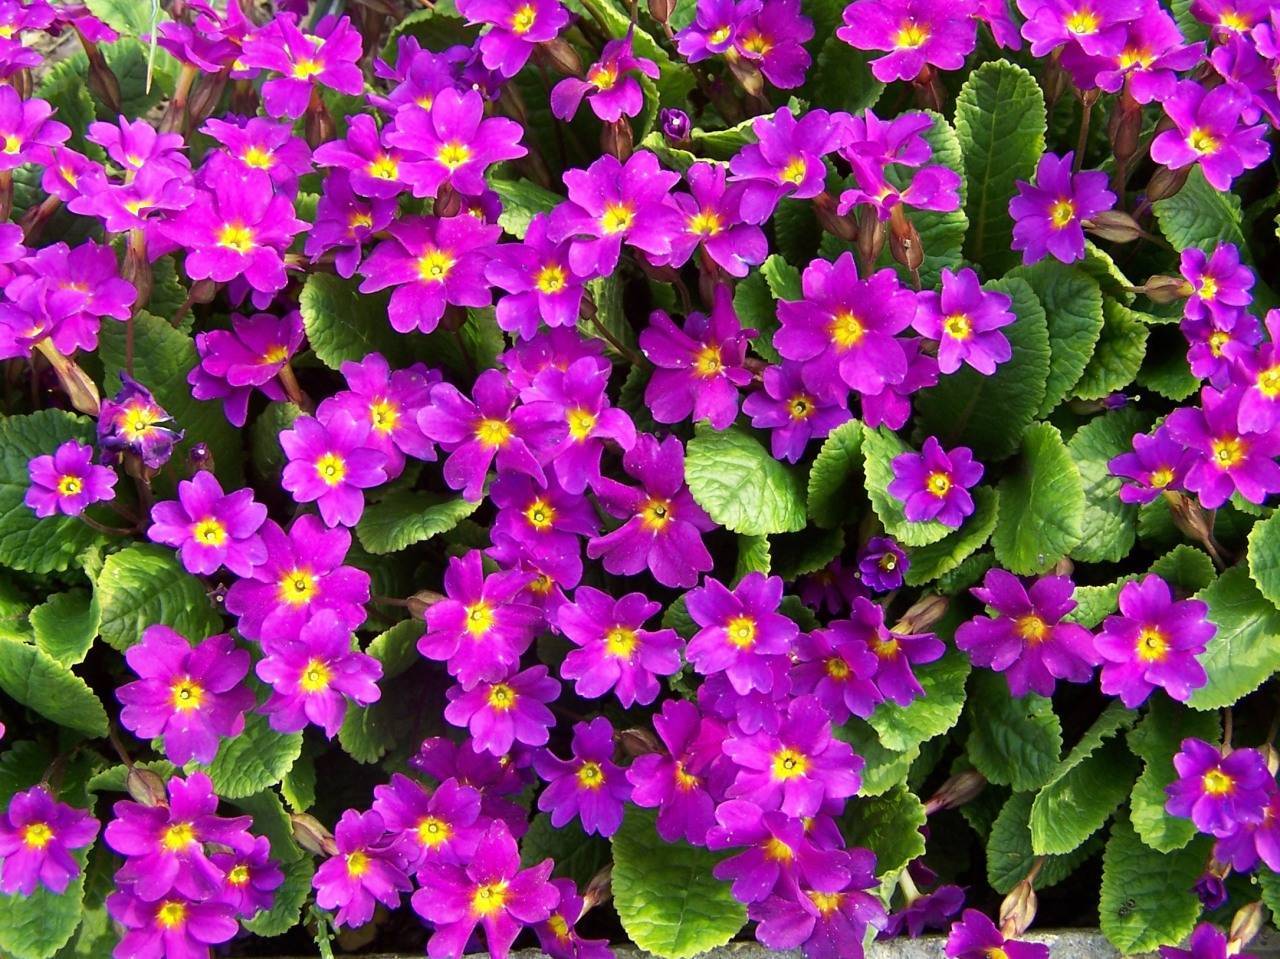 pink-purple flowers with yellow center, brown-pink sepals and green leaves